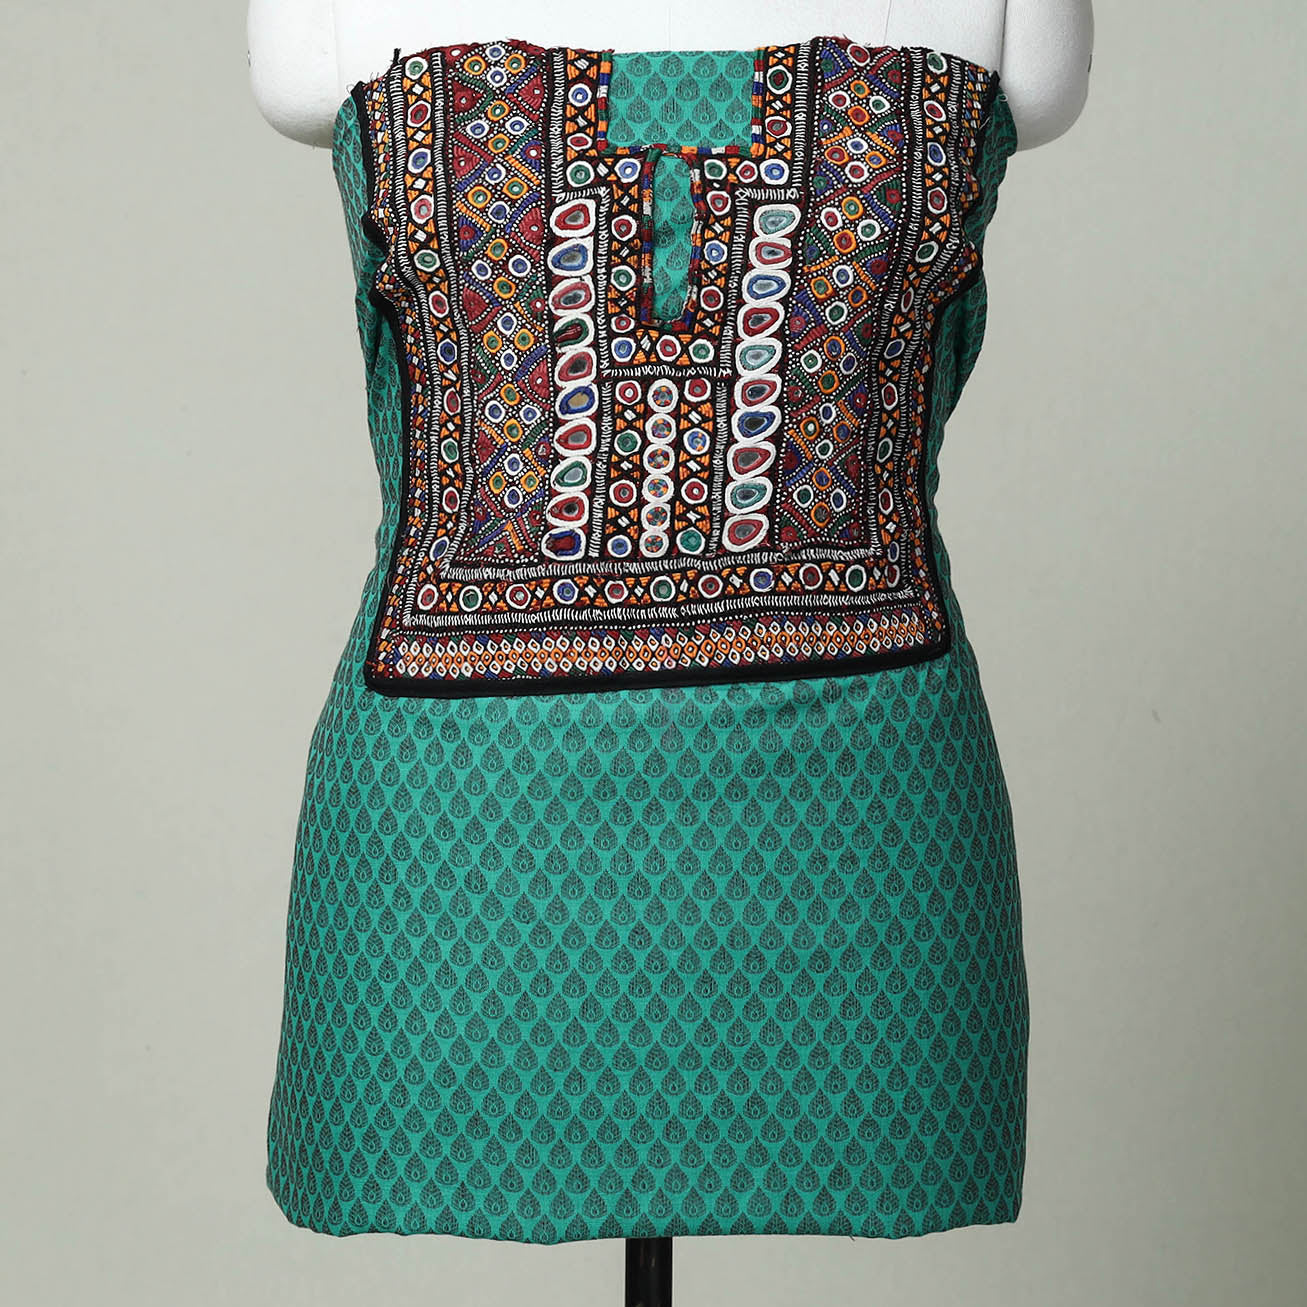 Green - Exclusive! Kutch Embroidery Work Cotton Kurti Material - 2.5 Meter